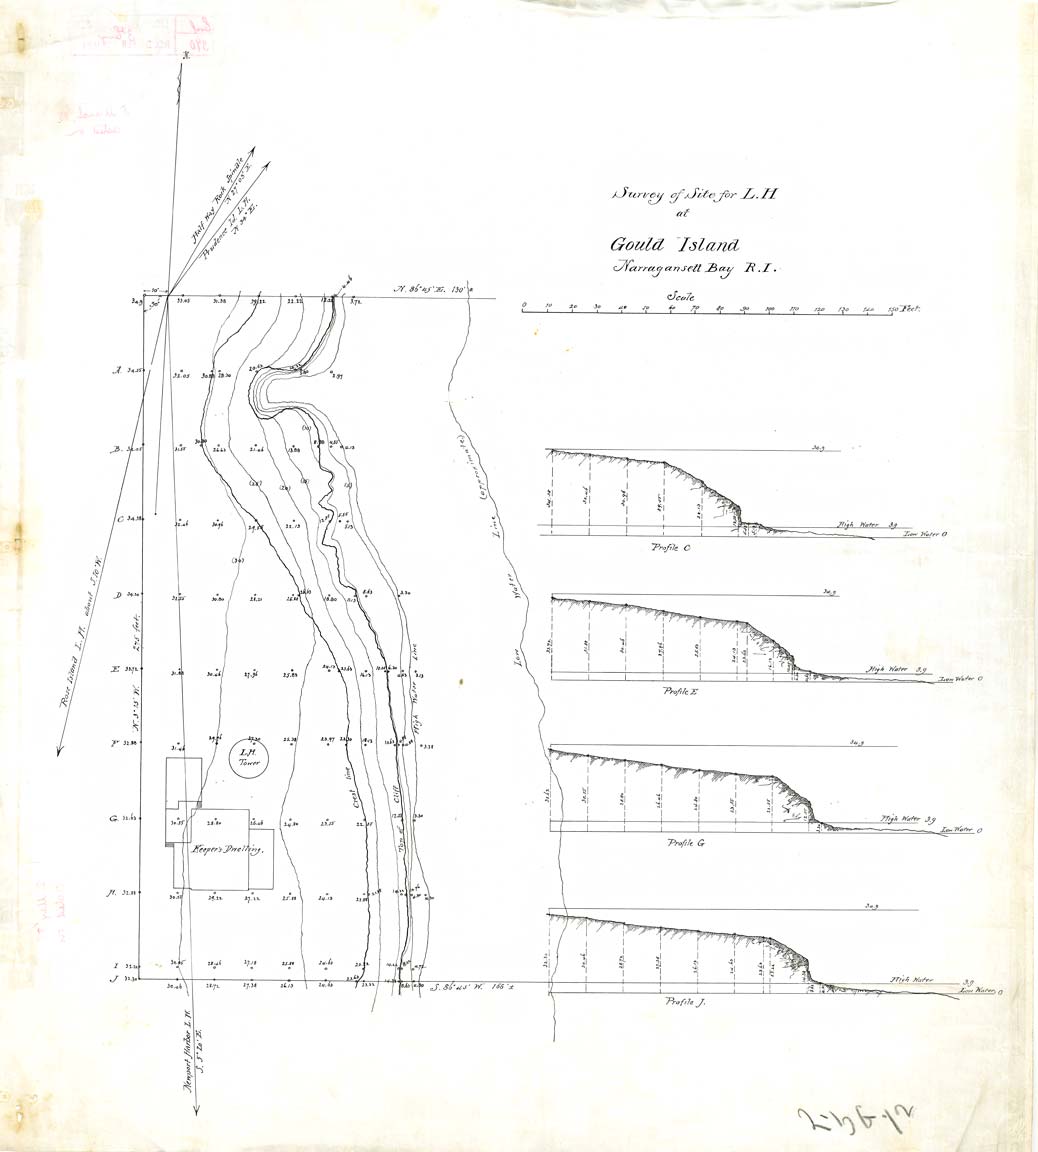 Survey of Site for Gould Island Lighthouse - 1888